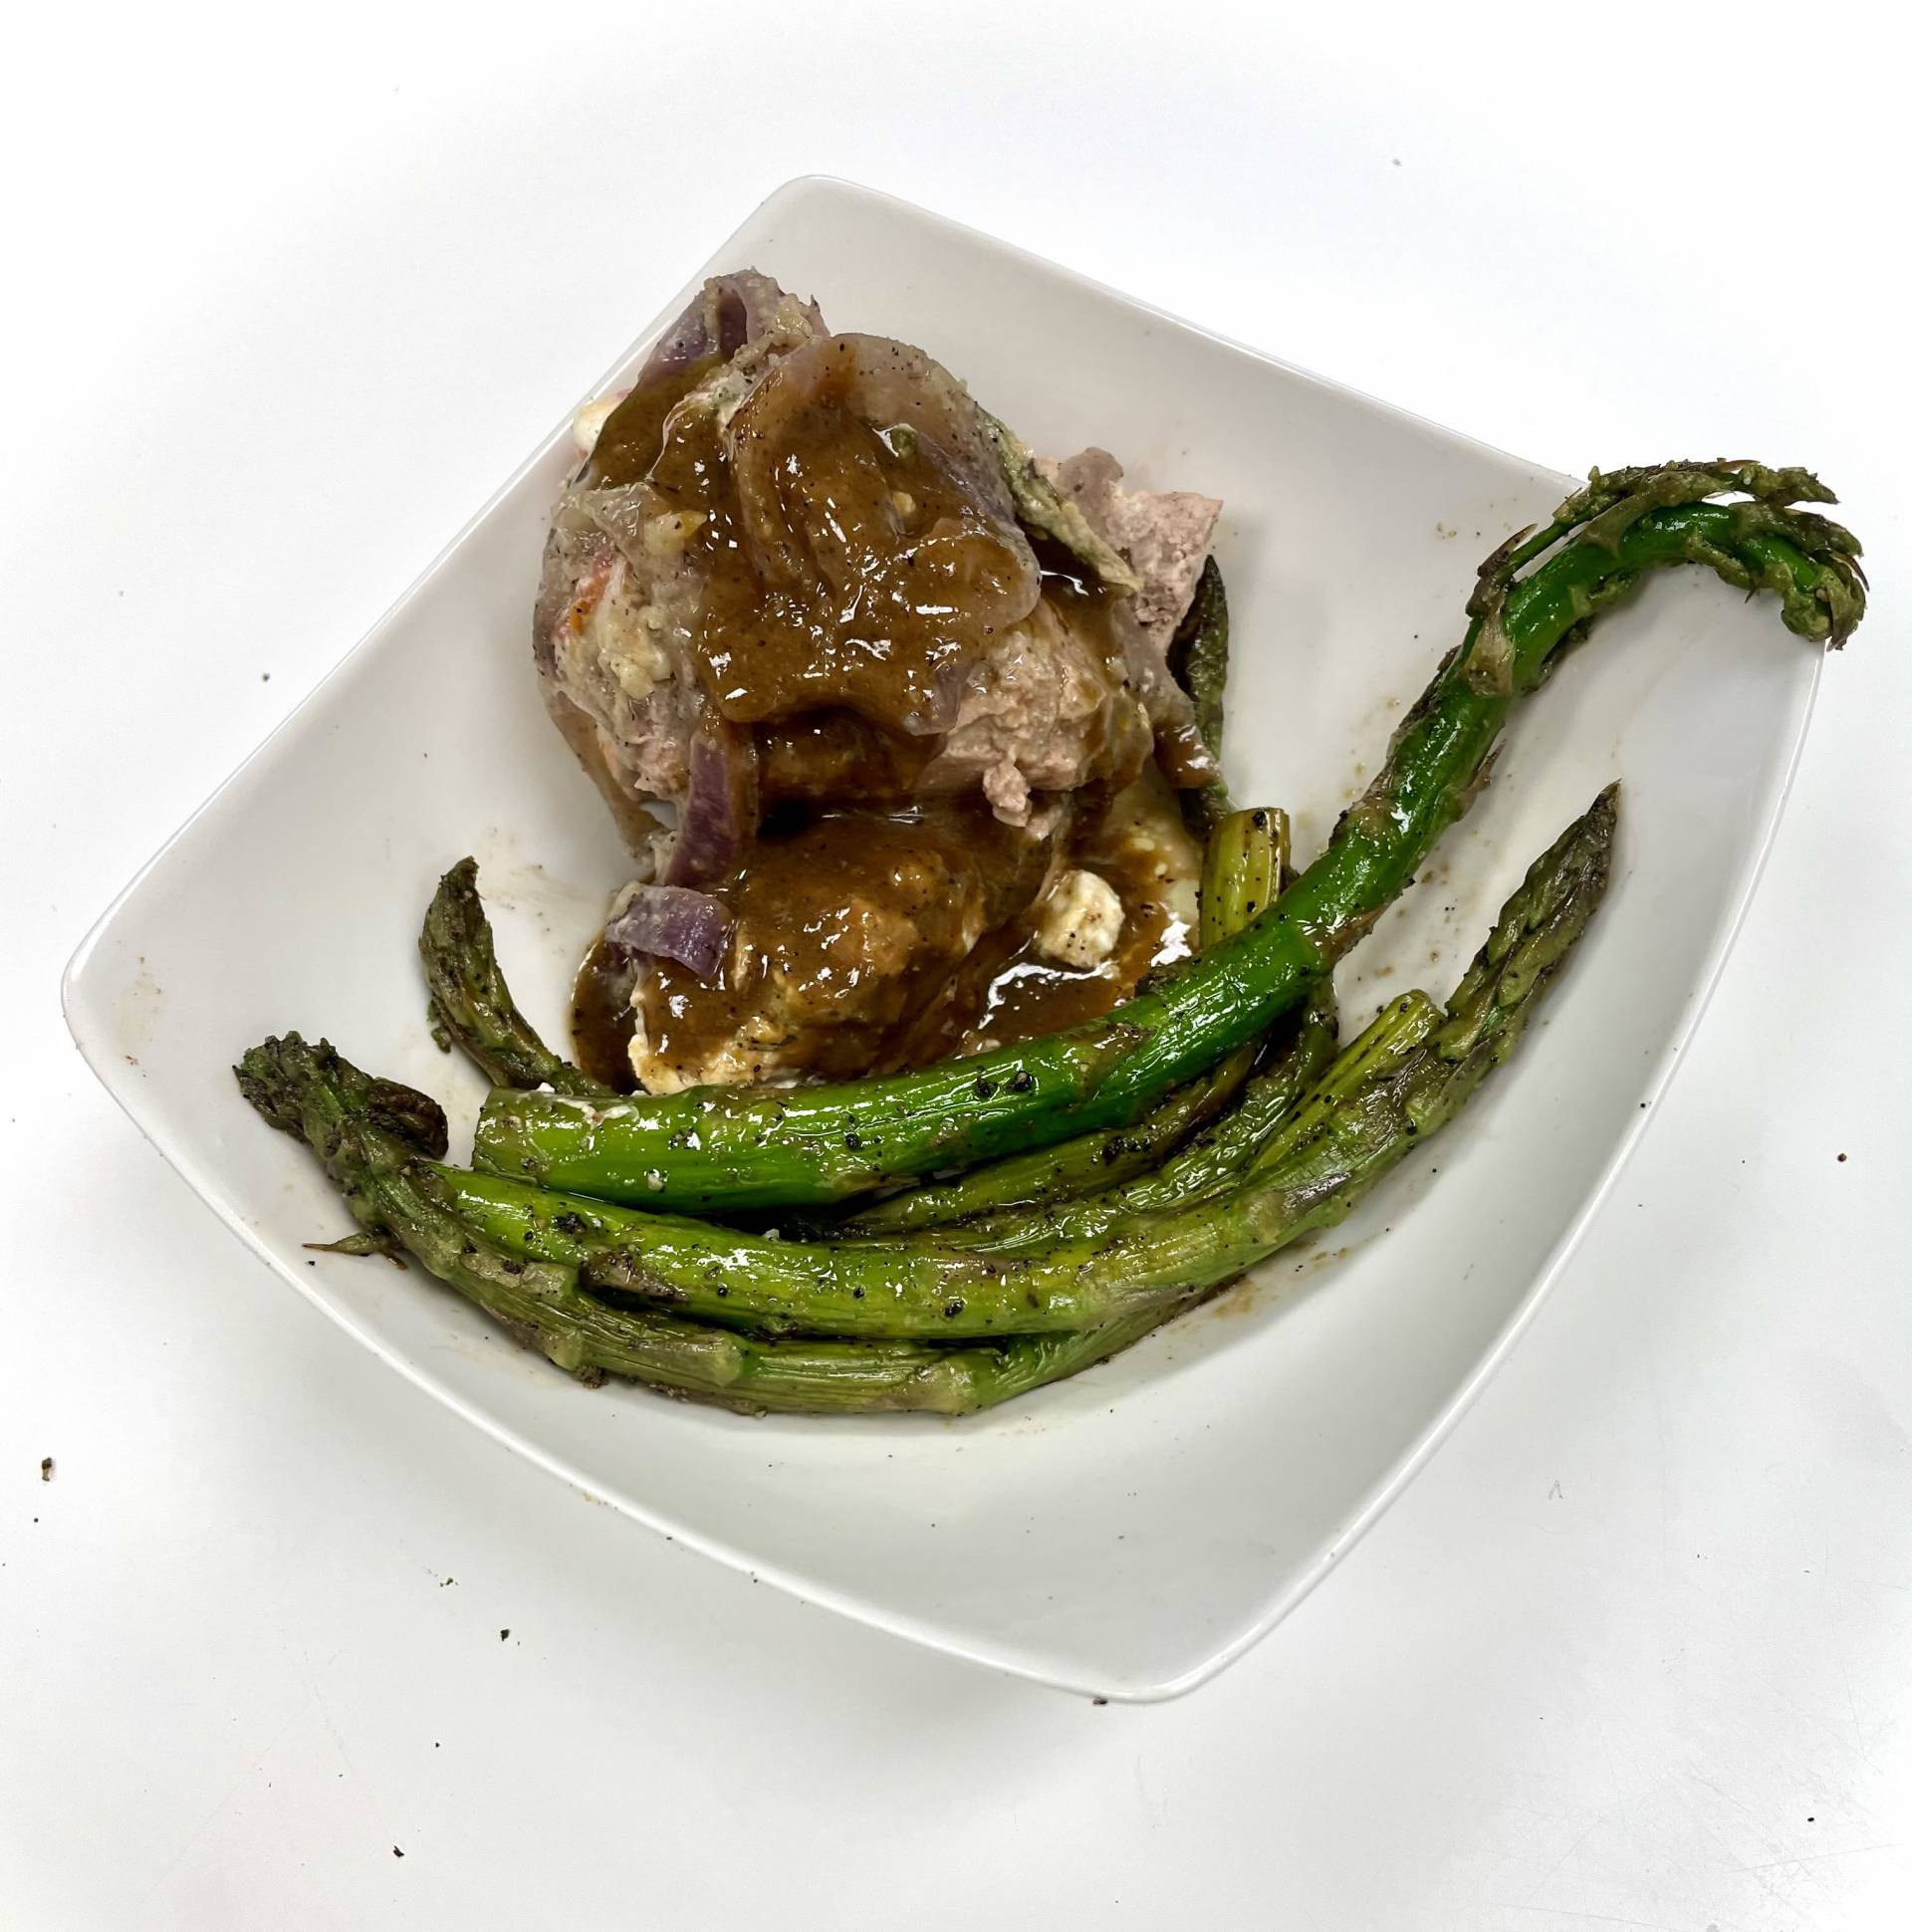 Stuffed Pork Loin with Caramelized Onions and Asparagus - Paleo